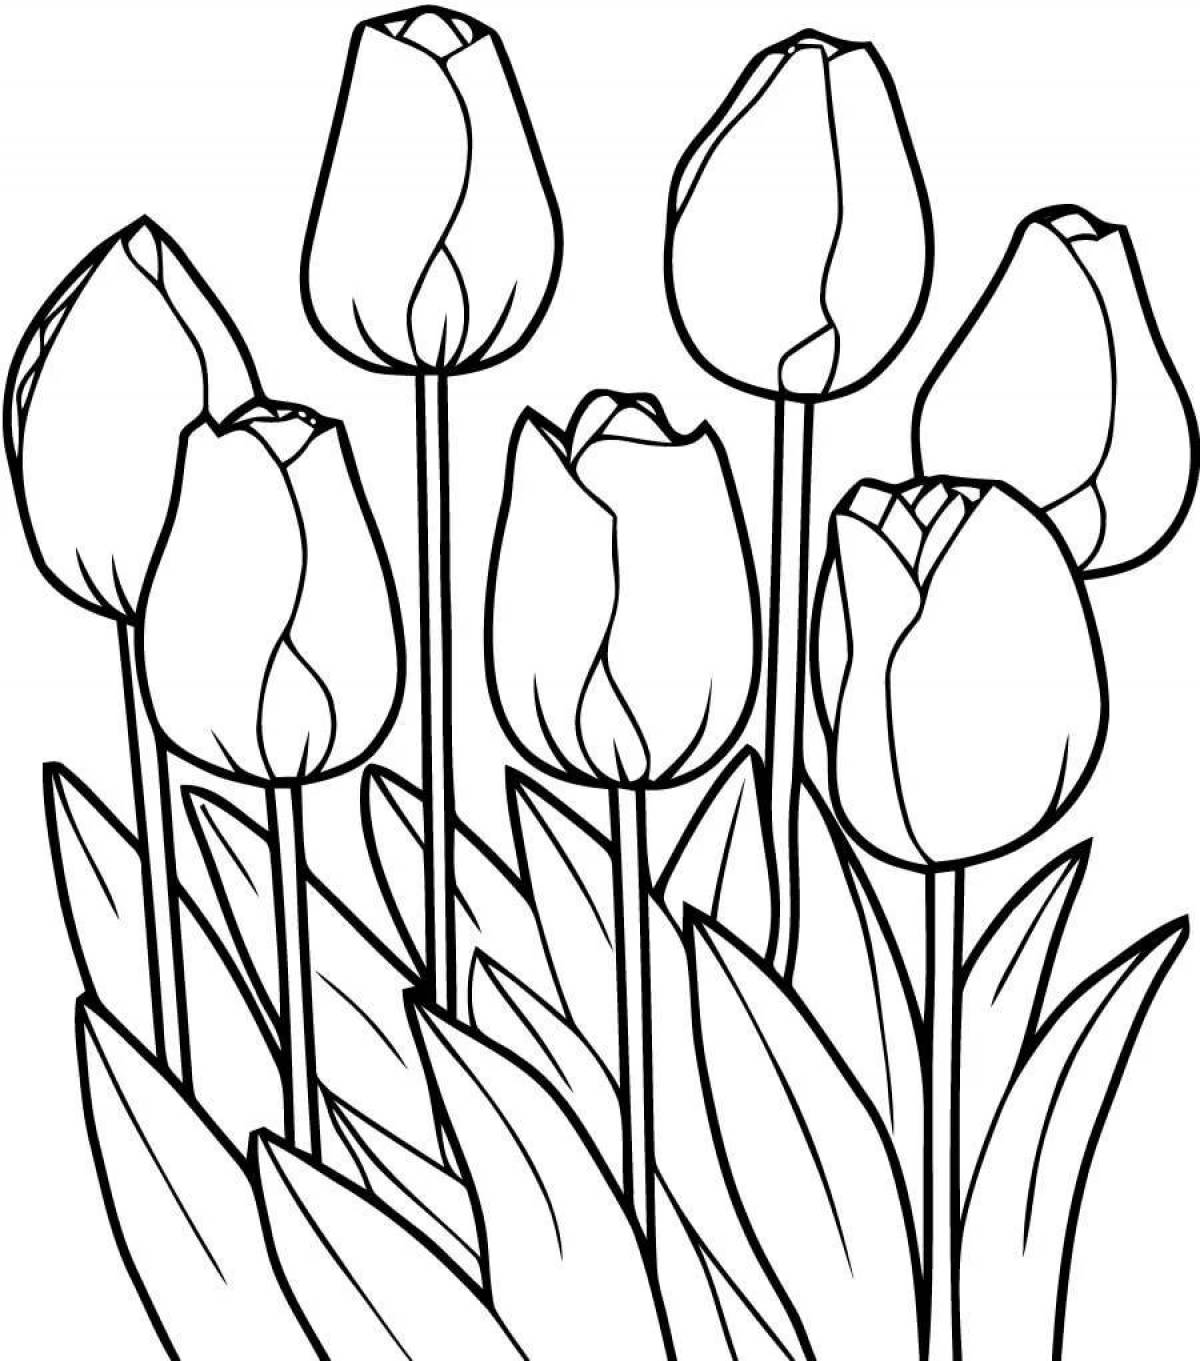 Outstanding tulips coloring book for 5-6 year olds